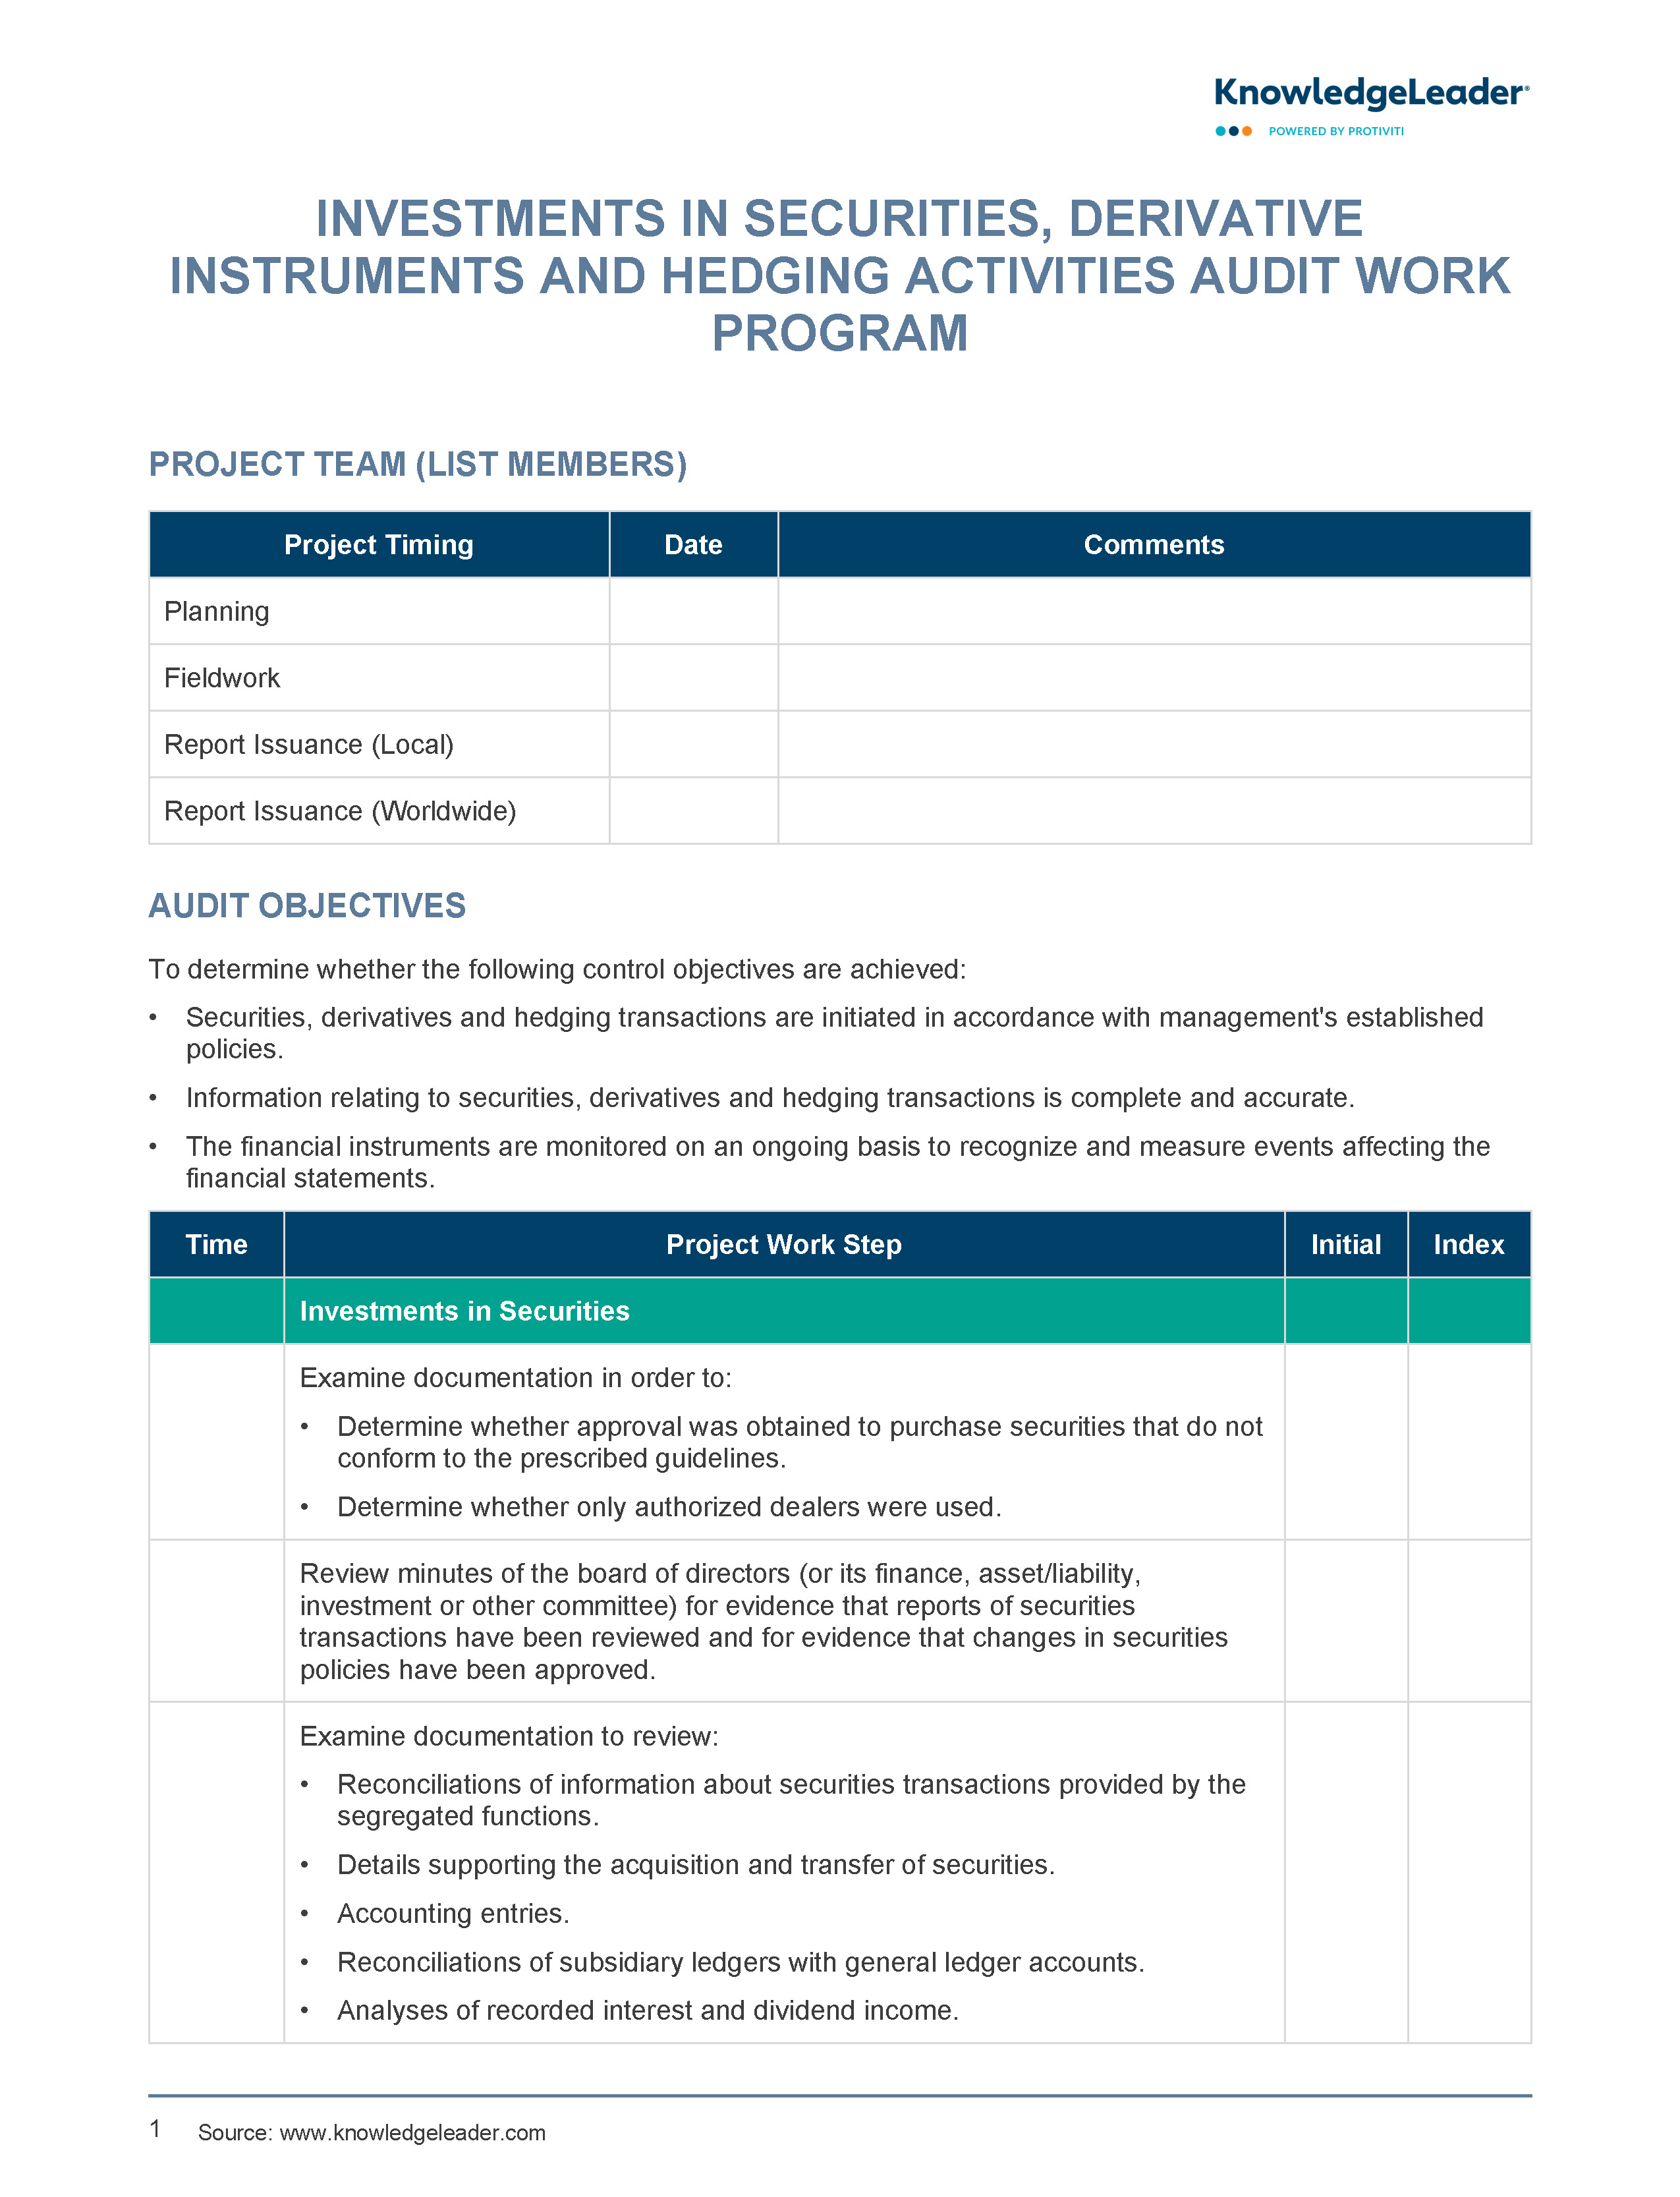 Screenshot of the first page of Investments in Securities, Derivative Instruments and Hedging Activities Audit Work Program